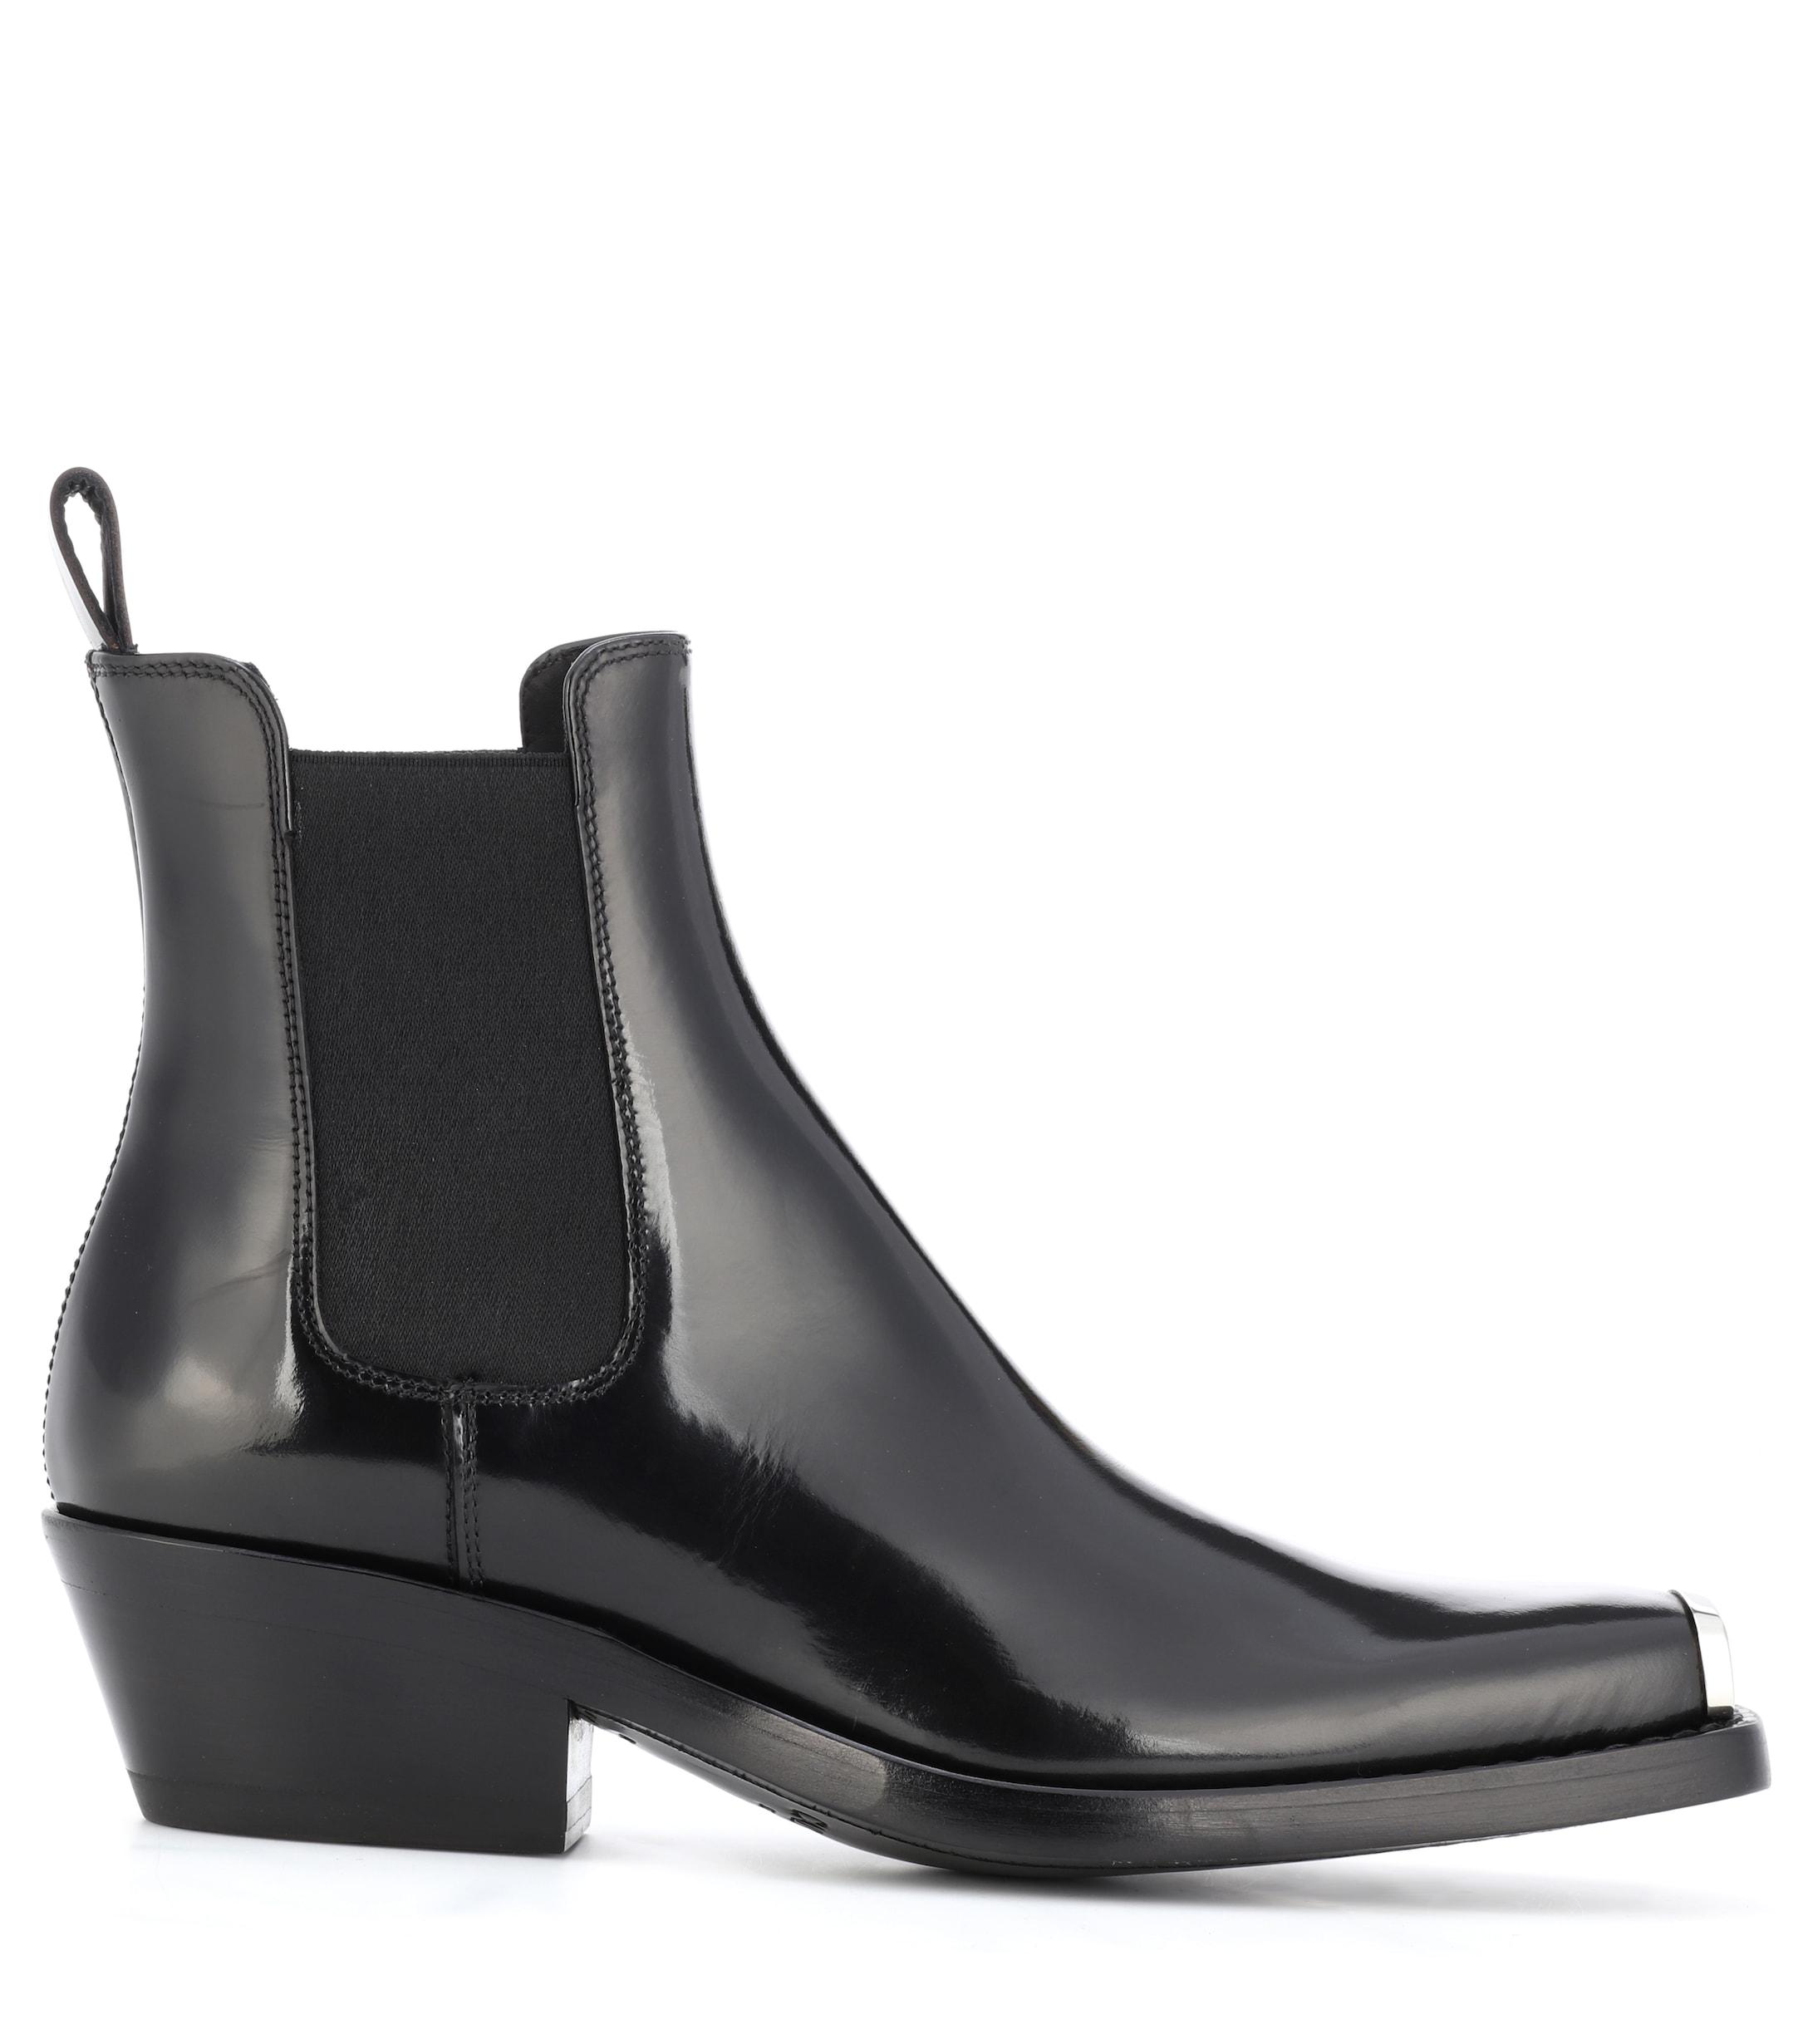 CALVIN KLEIN 205W39NYC Western Claire Leather Ankle Boots in Black - Lyst